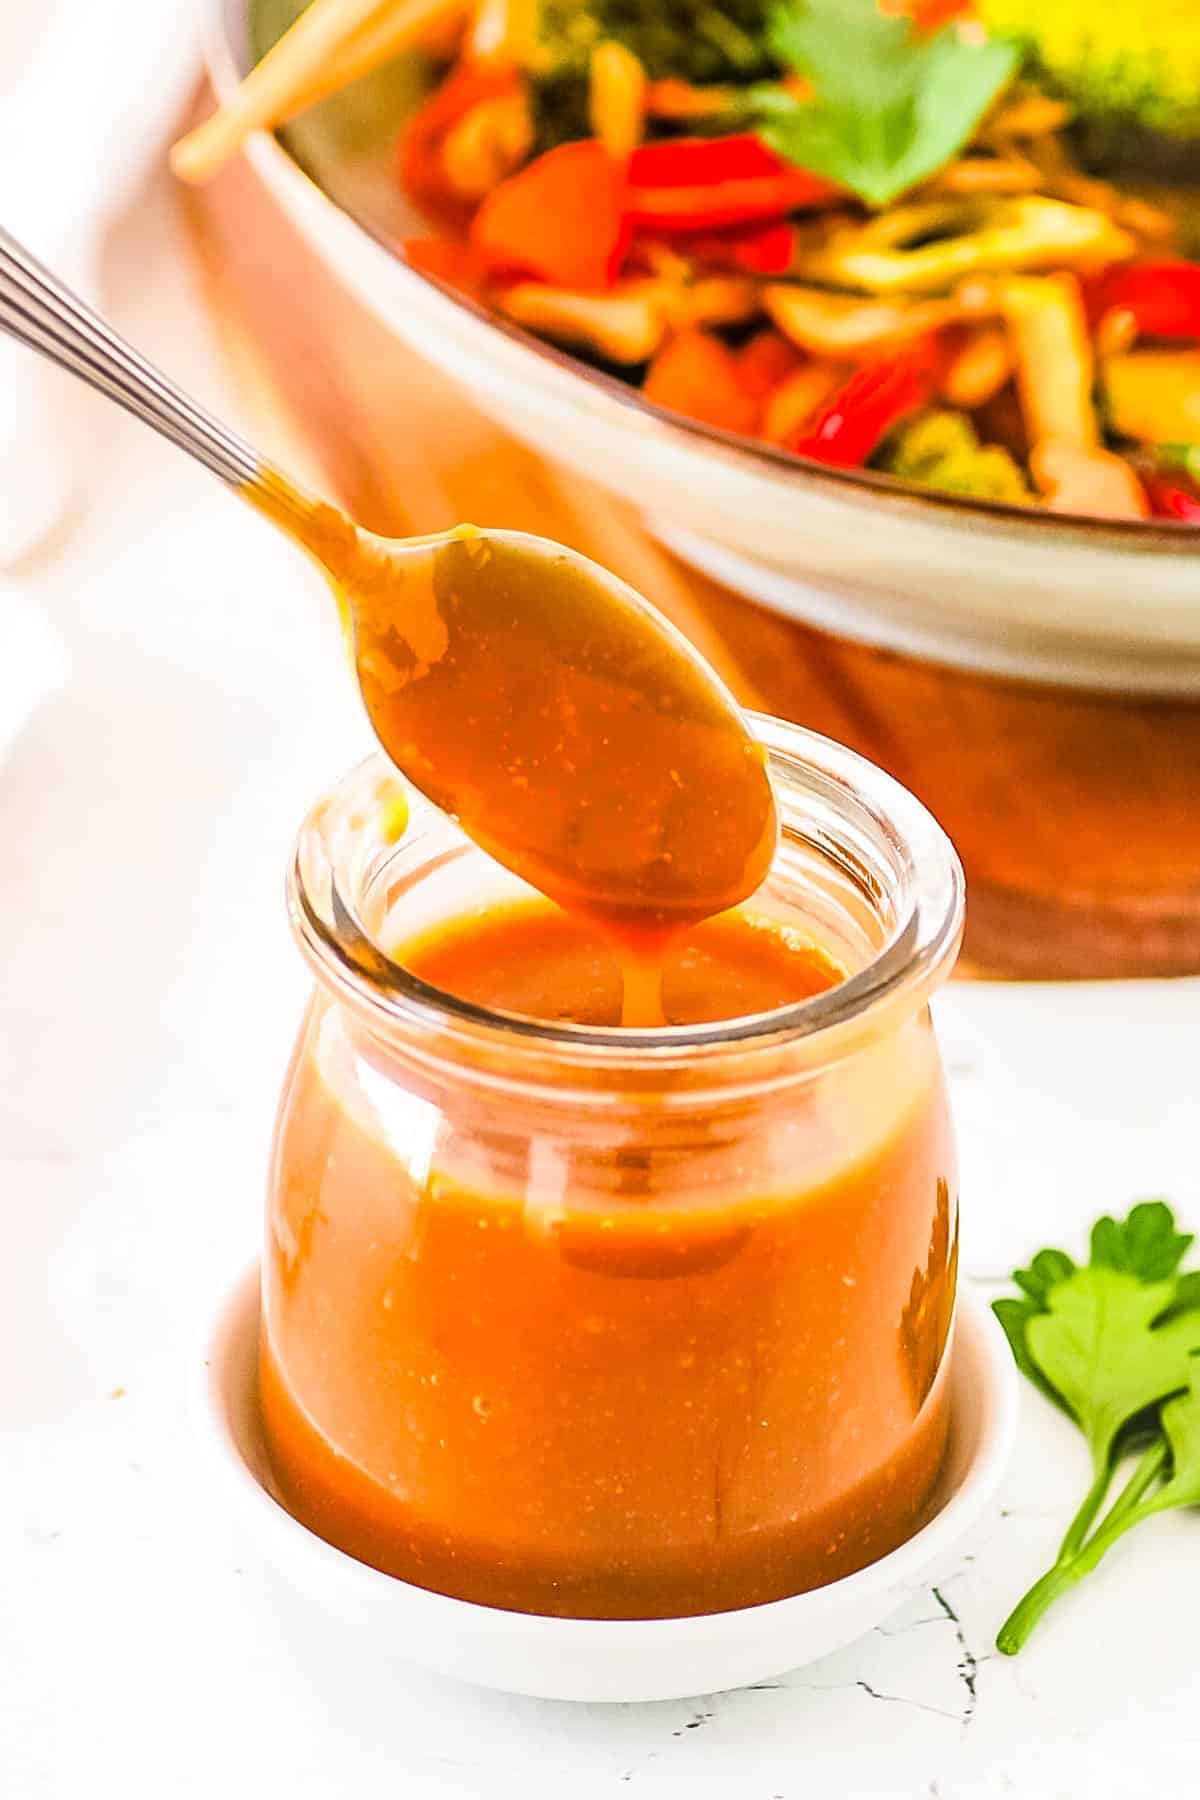 Healthy stir fry sauce, served in a gl، jar with a s،.